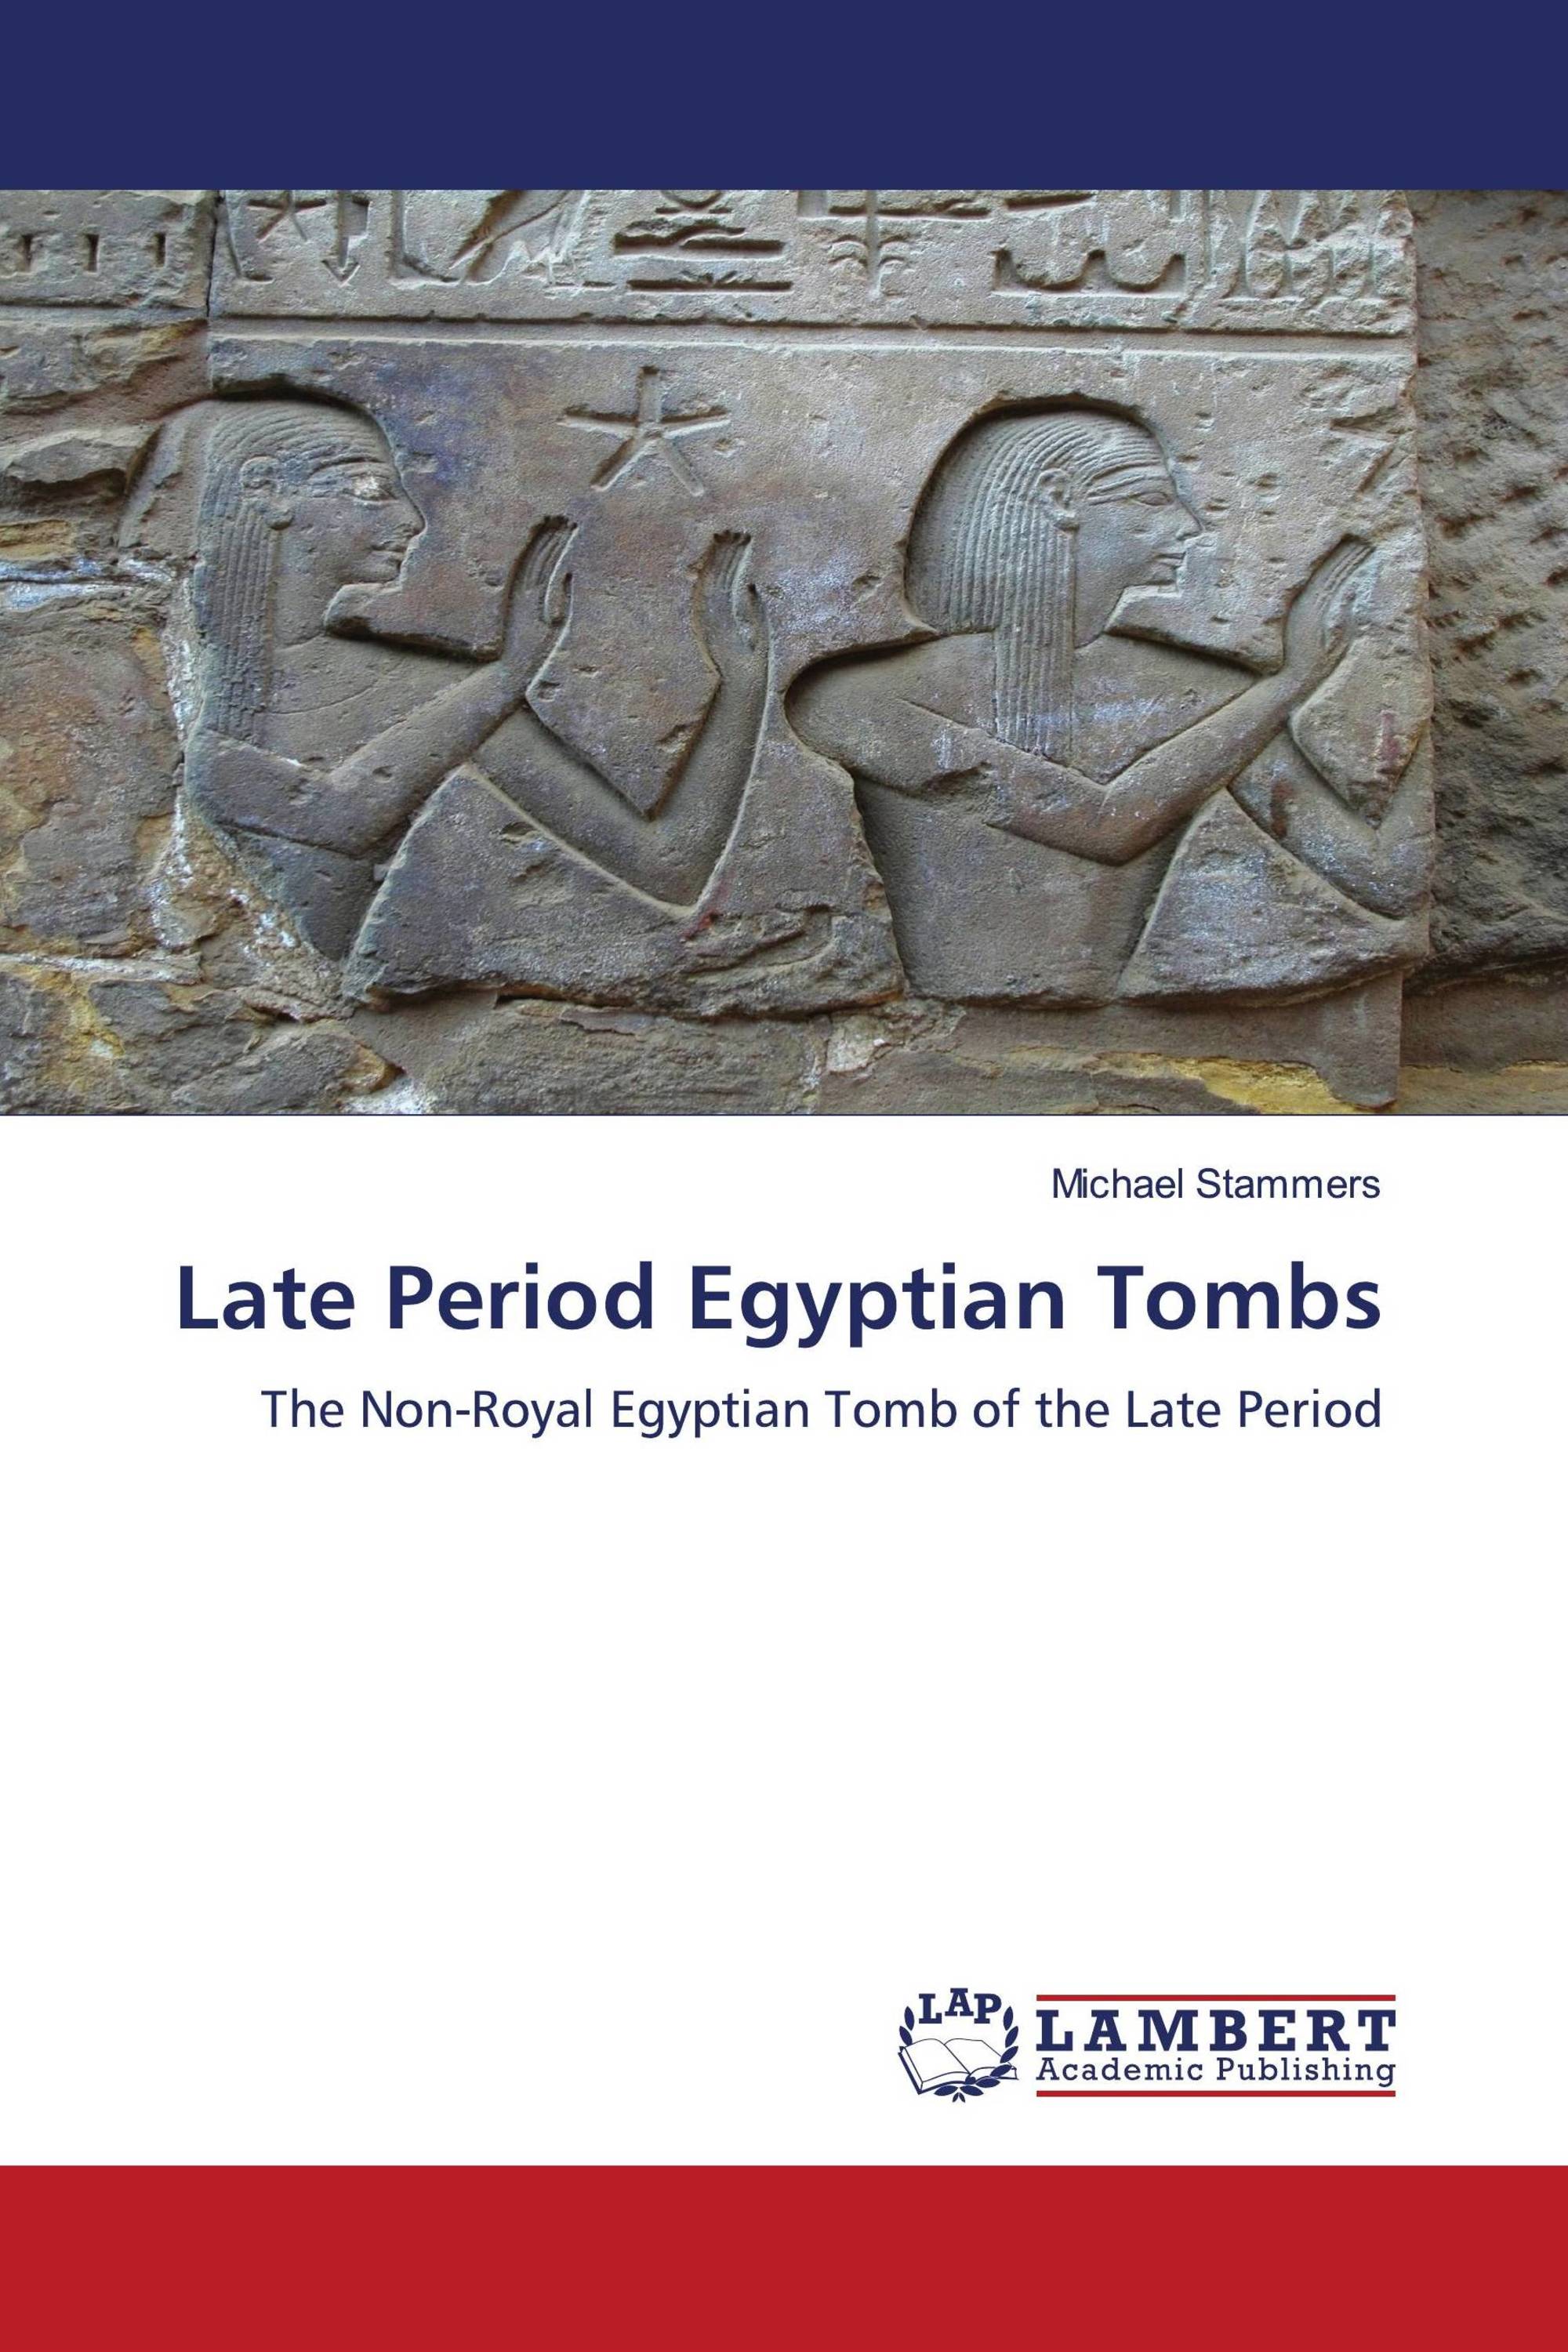 Late Period Egyptian Tombs